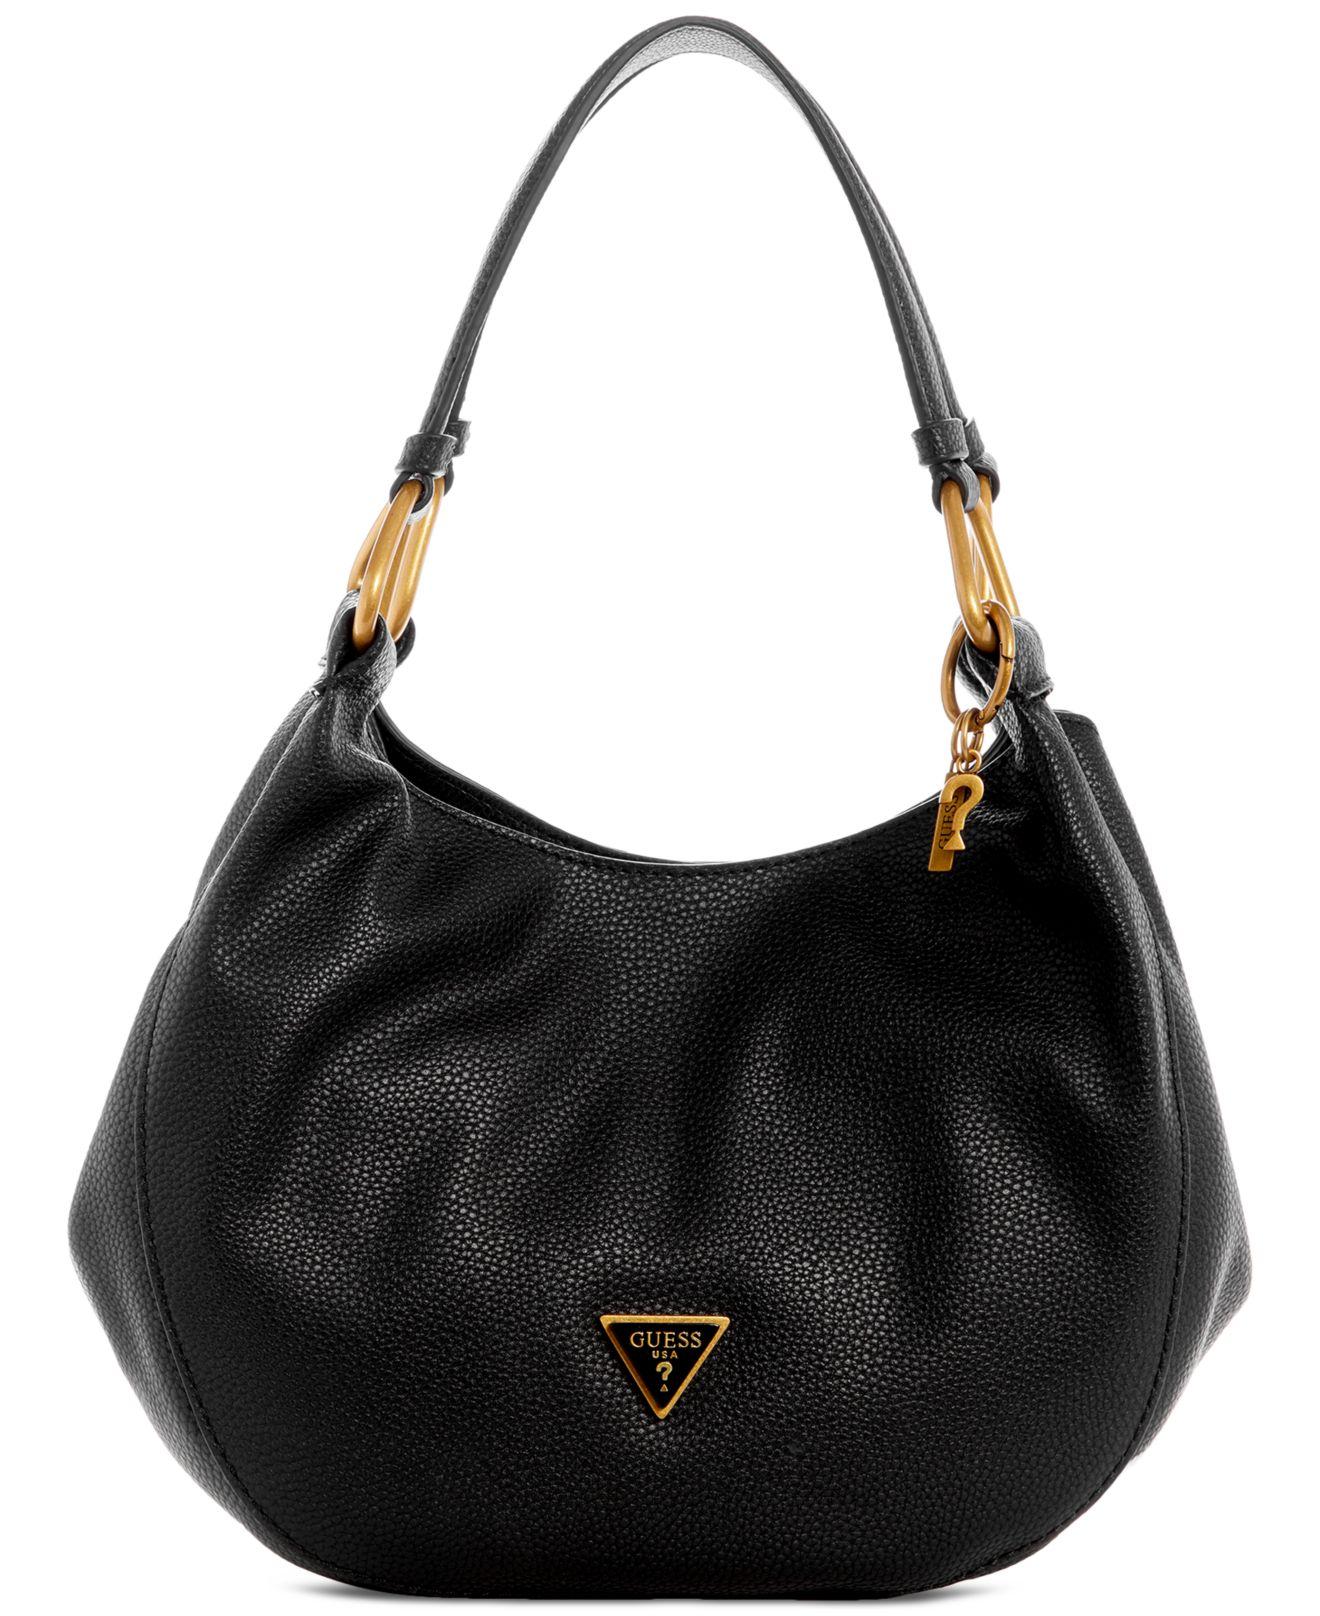 Guess Becci Faux Pebble Leather Medium Carryall Bag in Black | Lyst